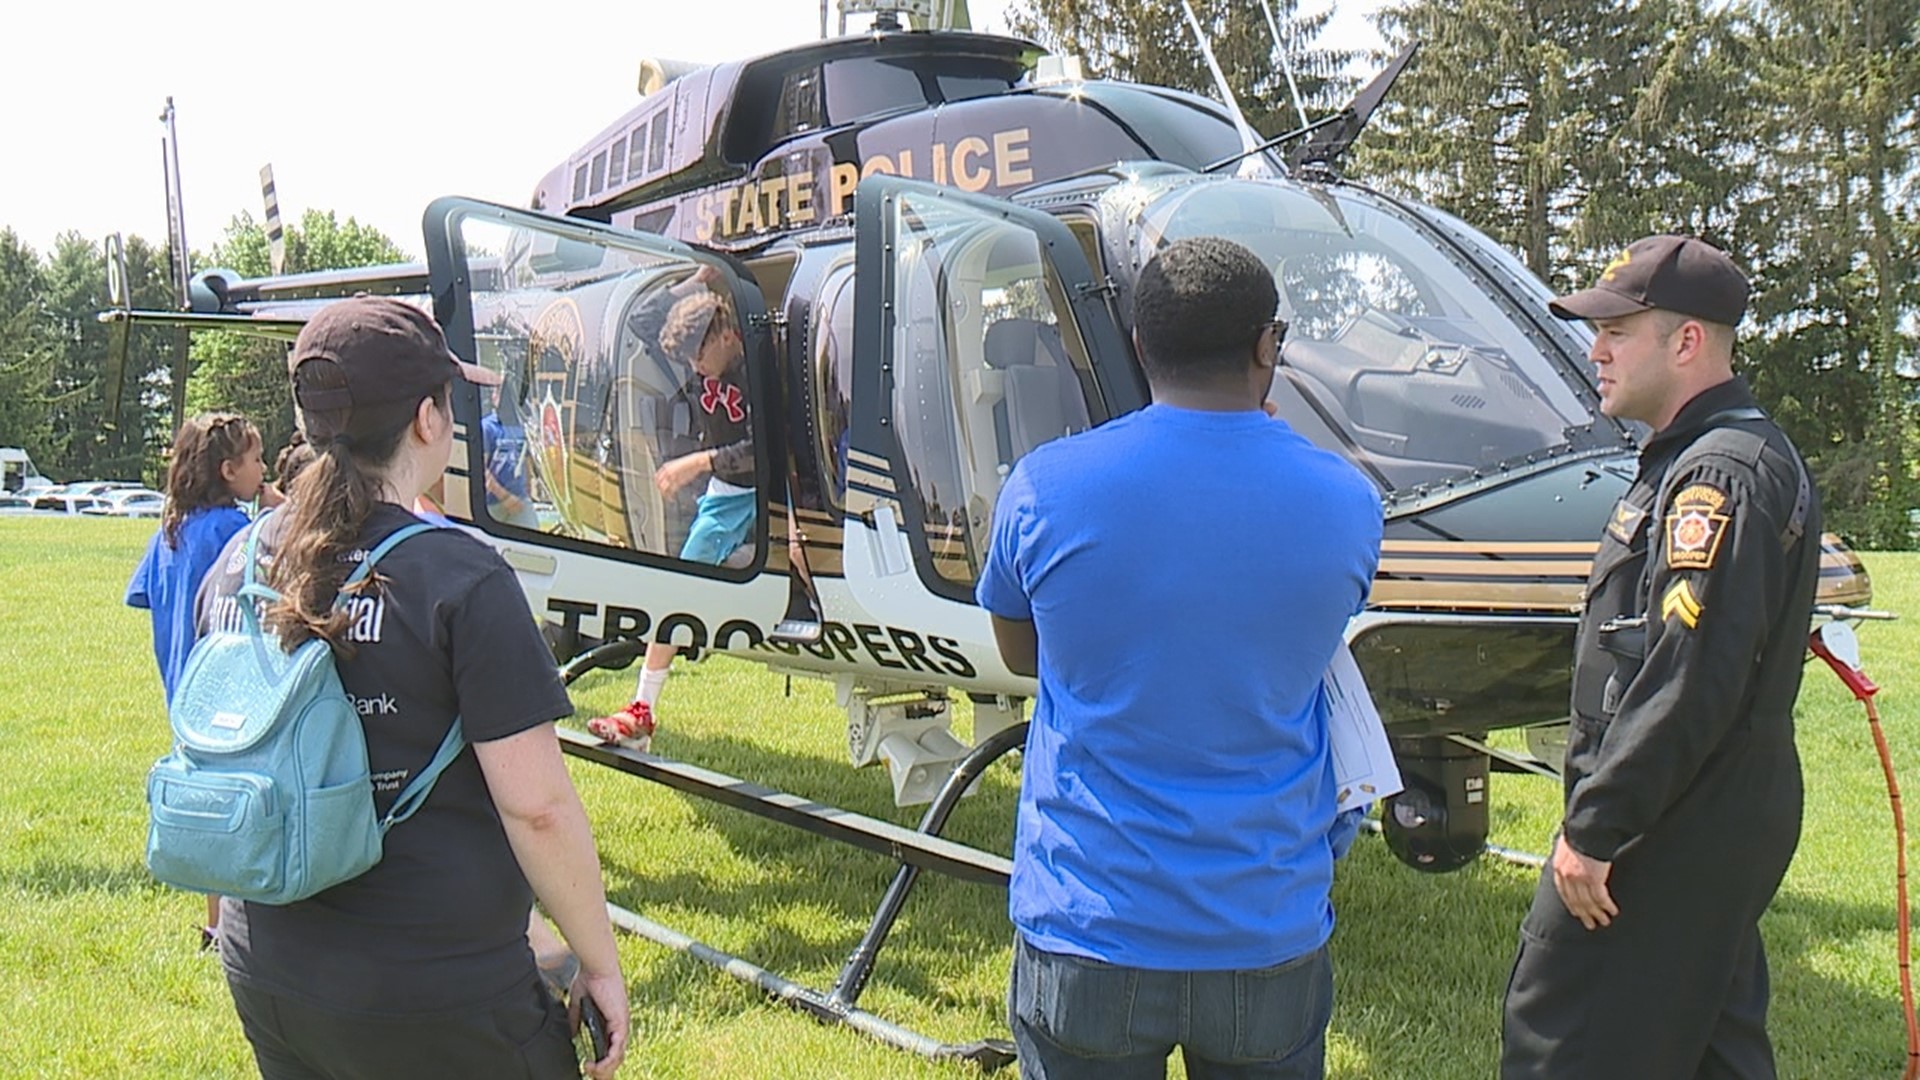 A handful of Central Pennsylvania kids got a look behind the line of duty, learning what it's like to serve on the force. Troopers used the opportunity to connect.